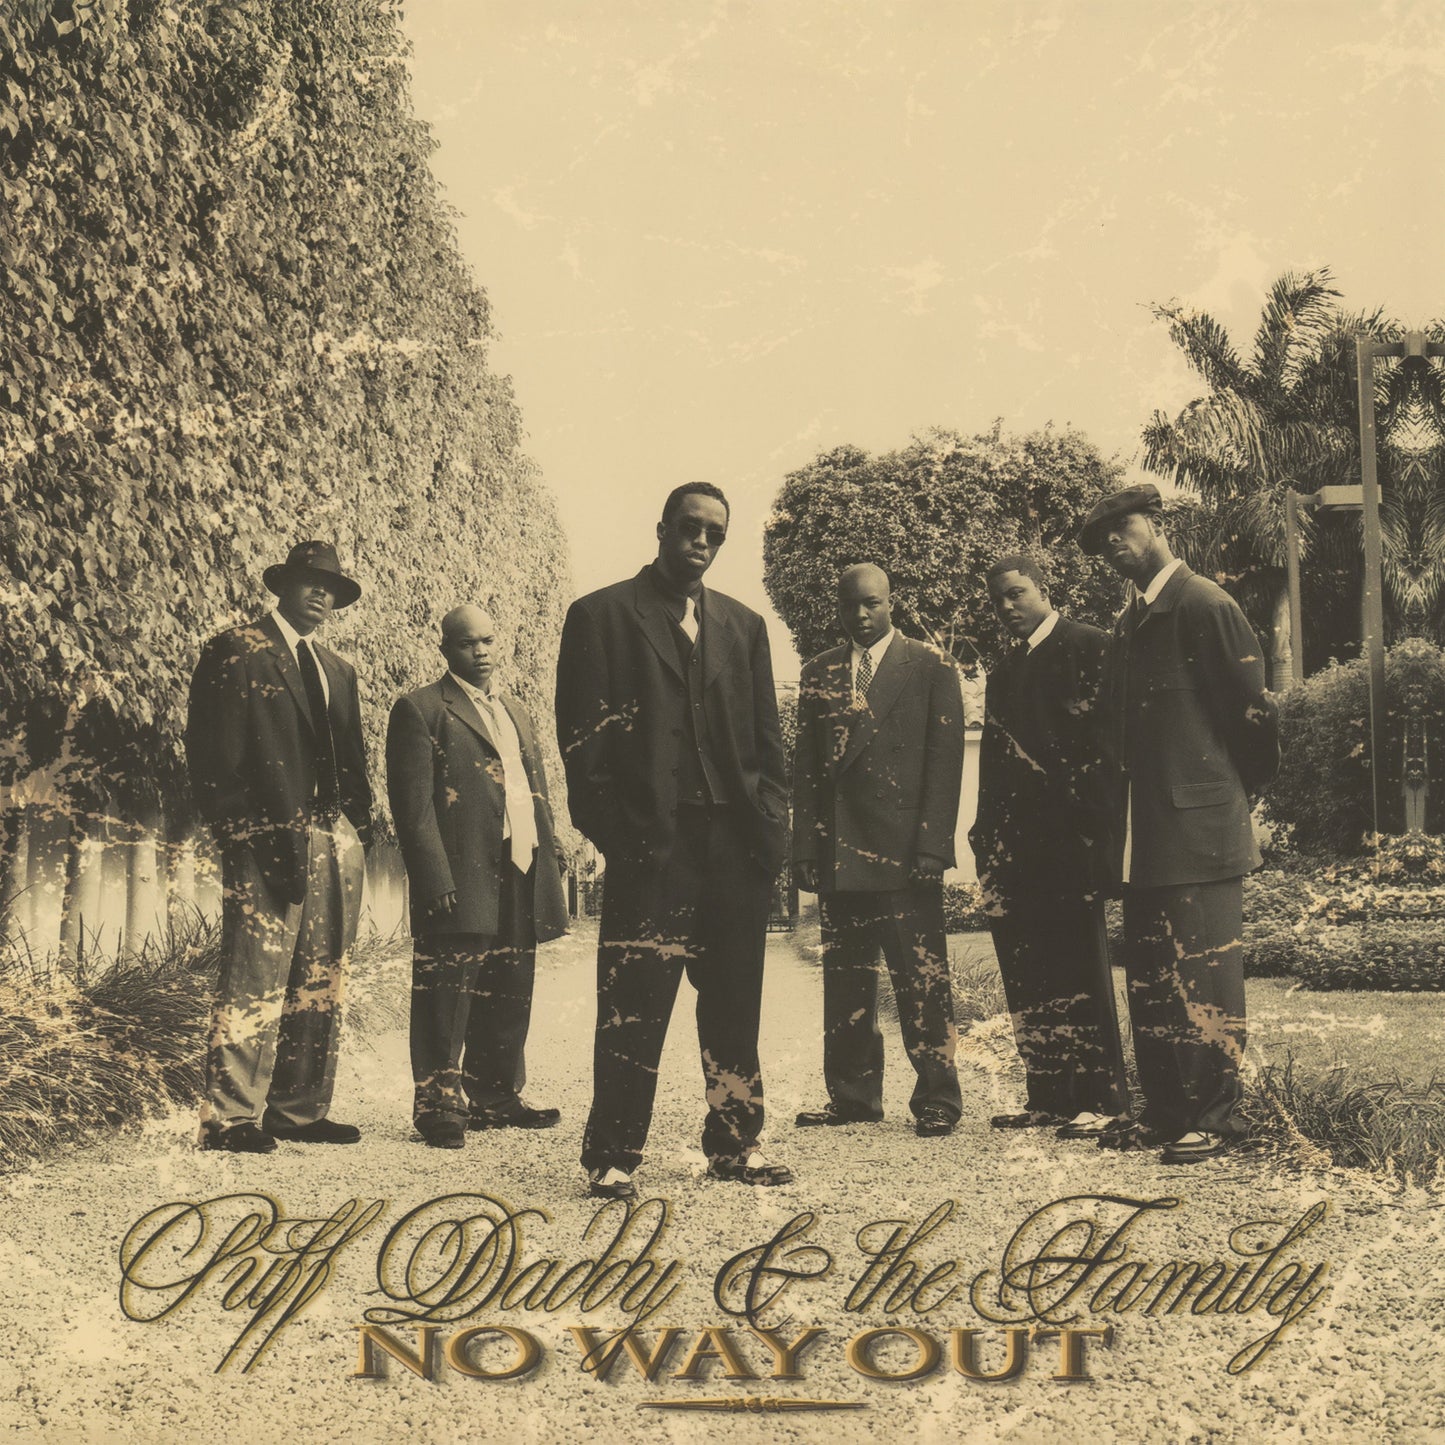 Puff Daddy & The Family "No Way Out" 2xLP (White Vinyl)